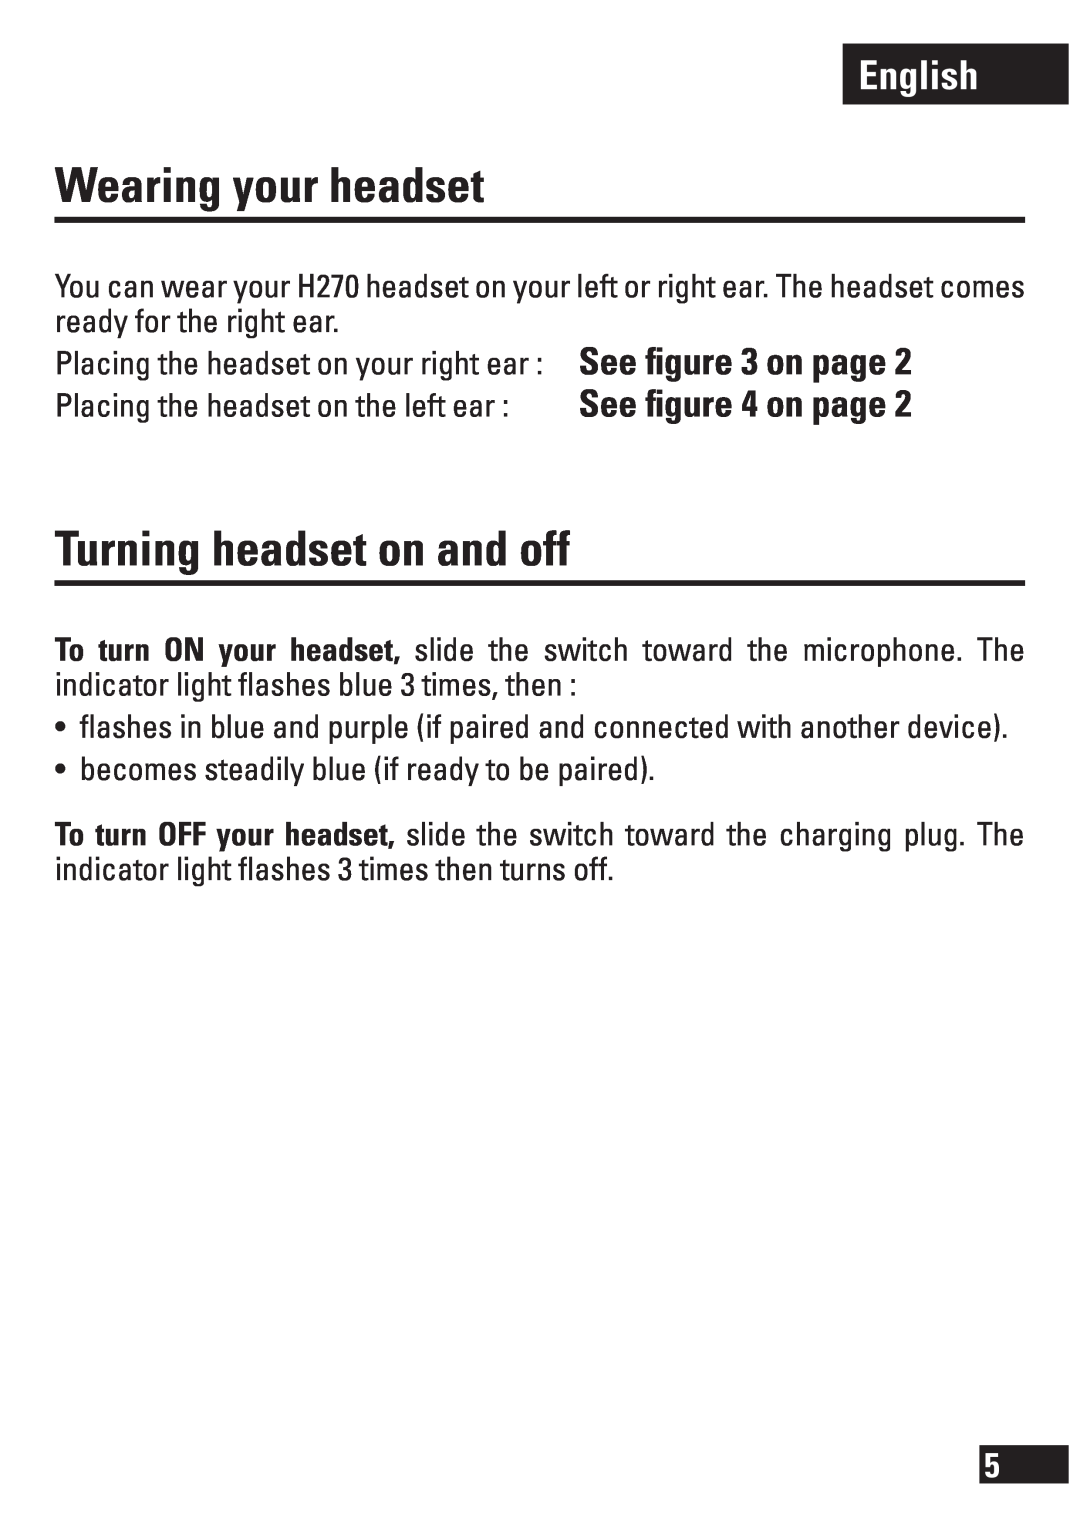 Motorola H270 manual Wearing your headset, Turning headset on and off, English, See ﬁgure 3 on page 2 See ﬁgure 4 on page 